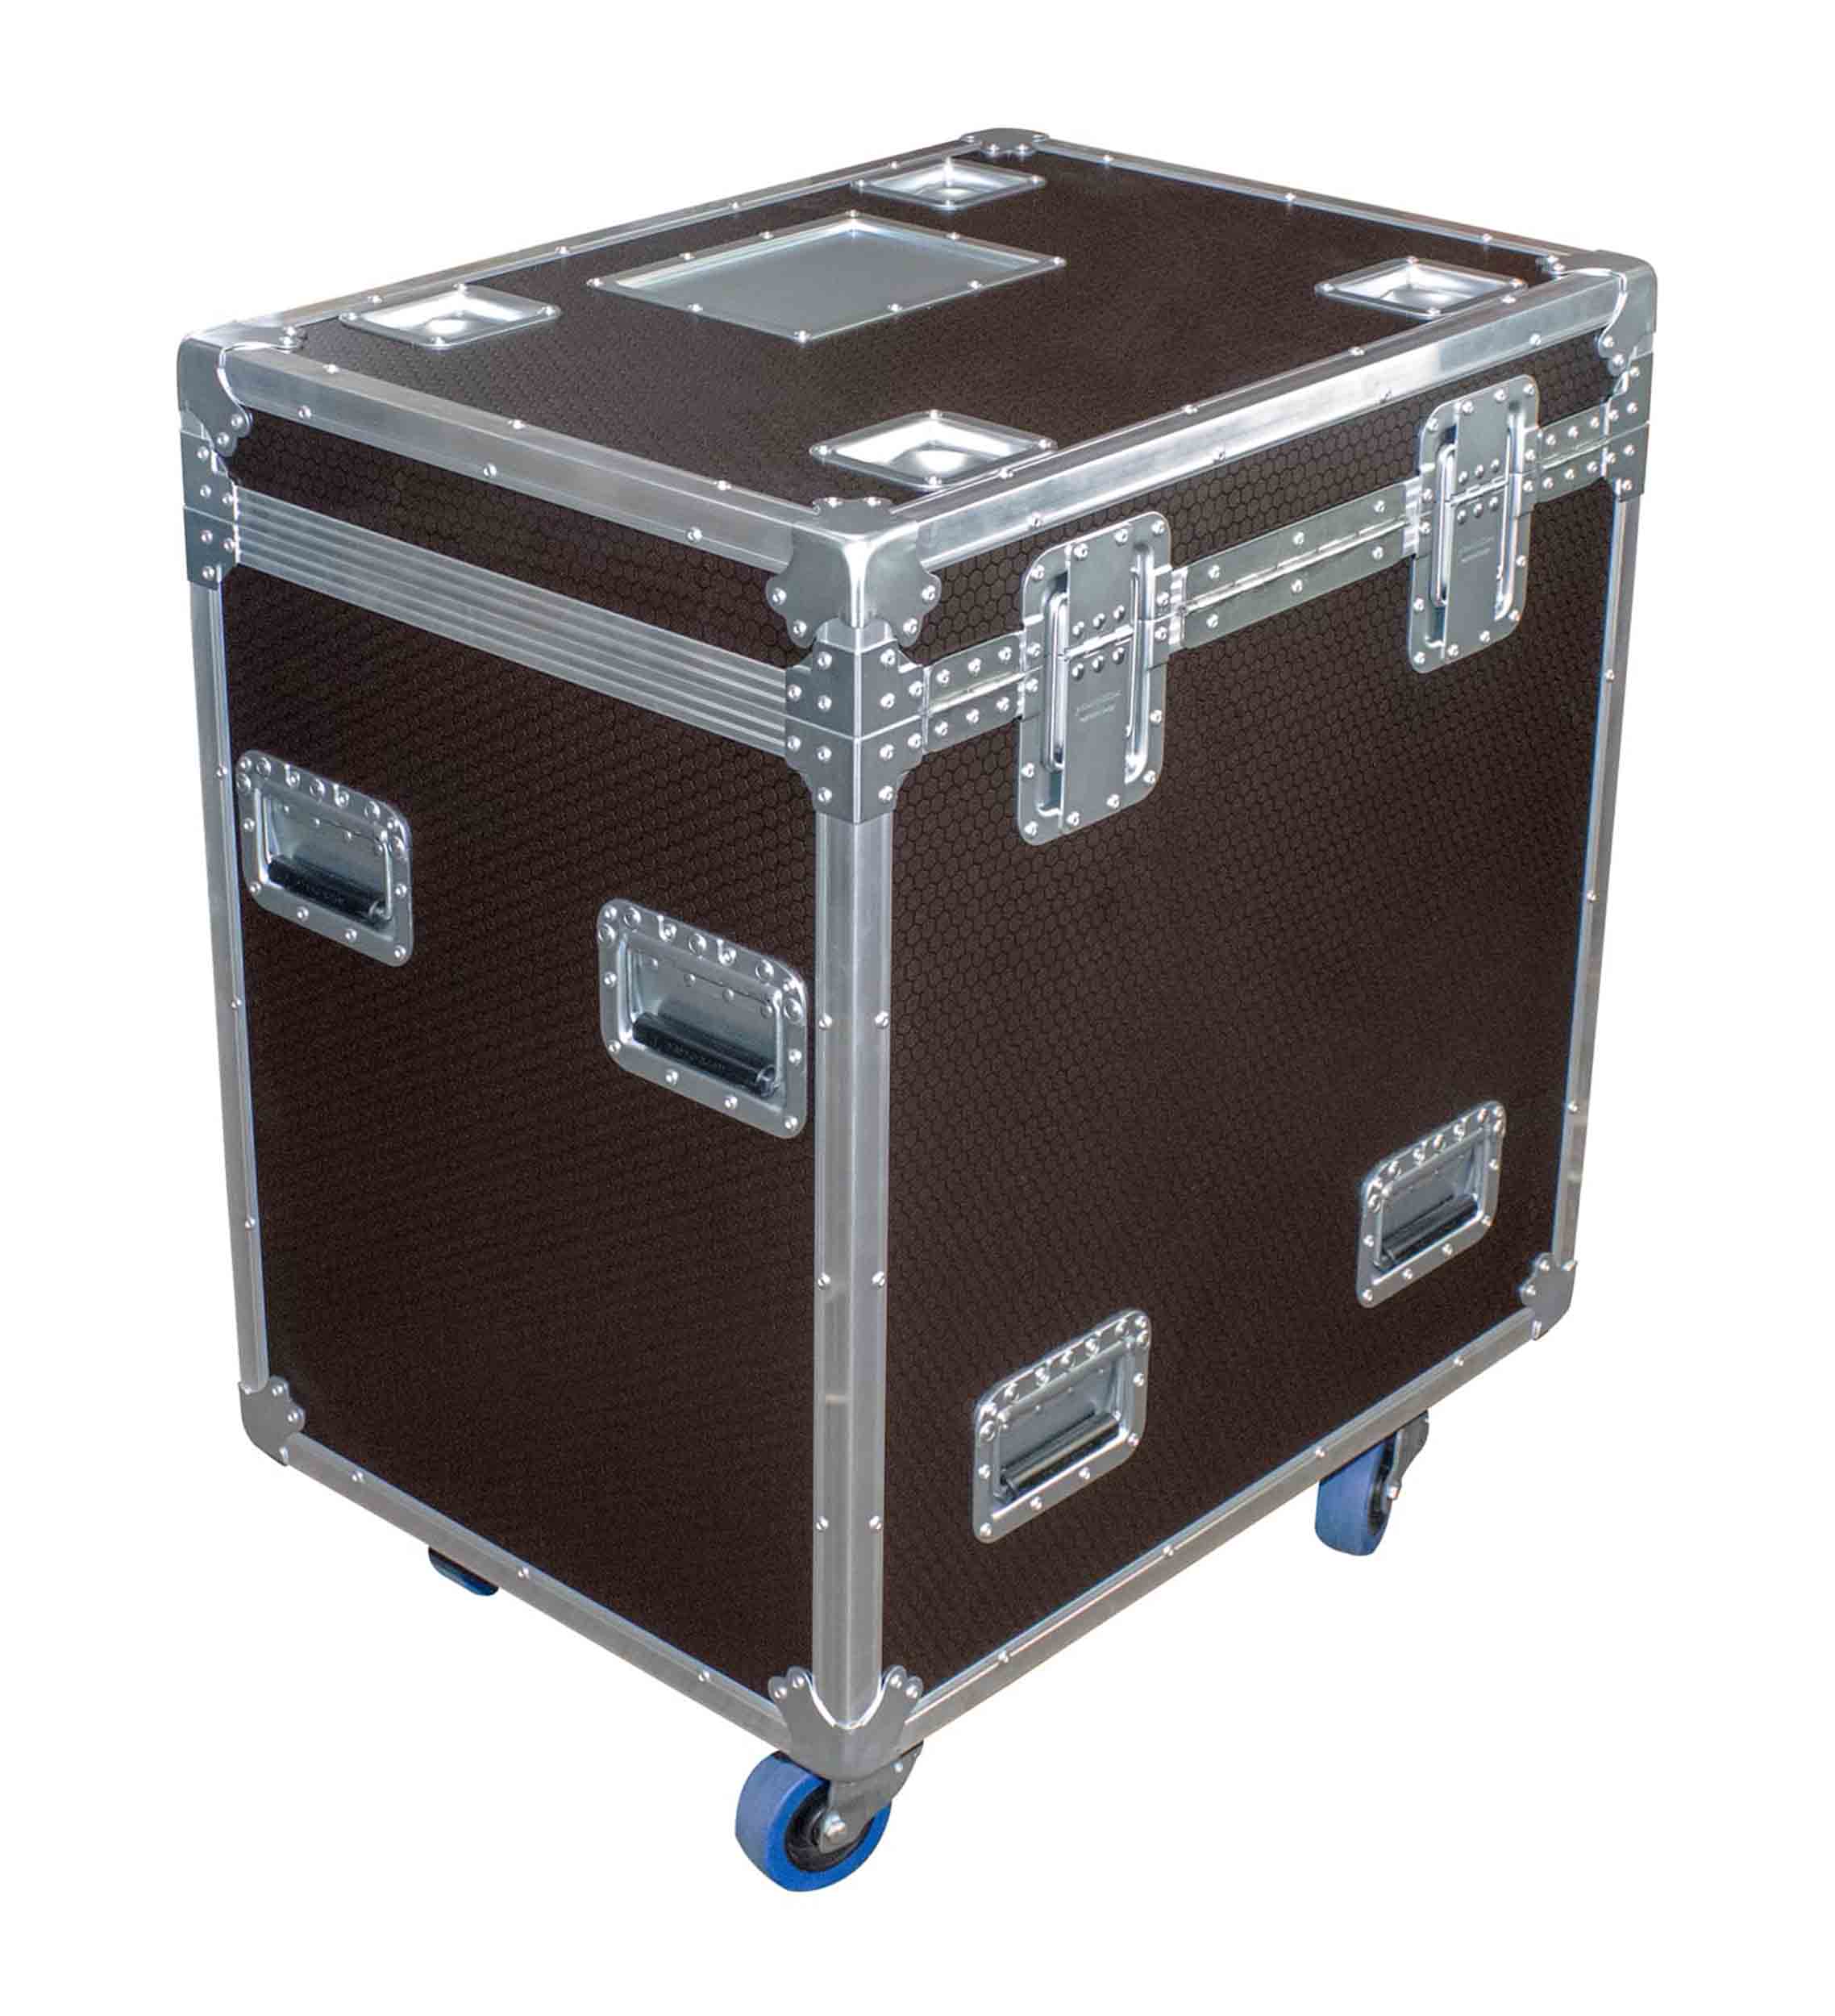 Odyssey OPT302230WBRN, Professional Brown Hex Board Utility Tour Trunk Case with Caster Wheels by Odyssey